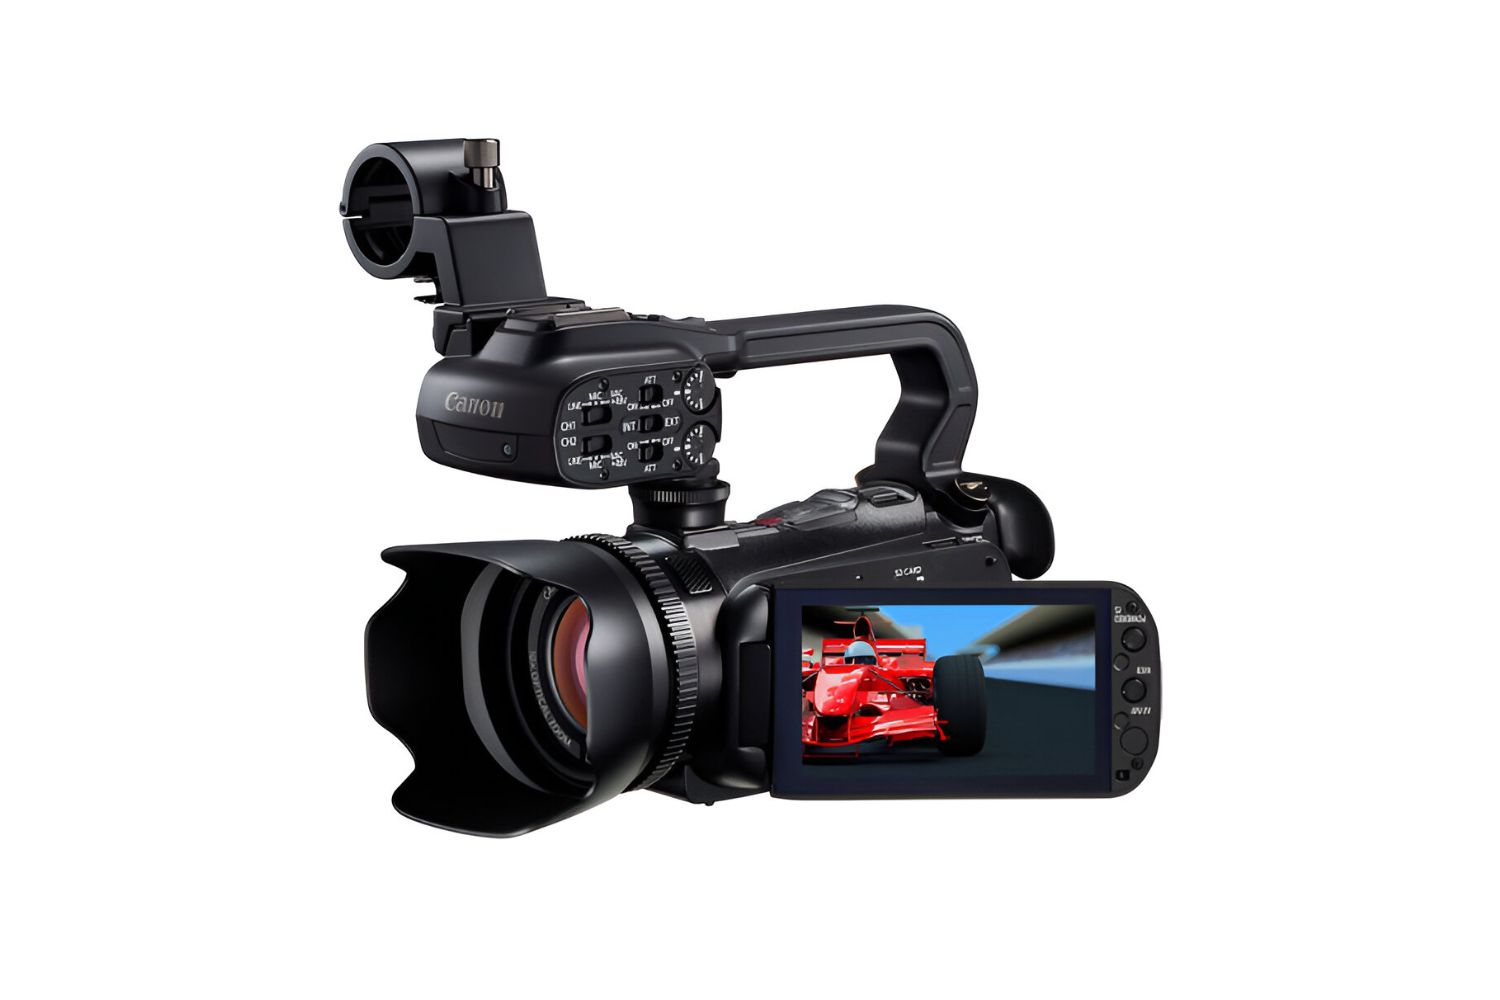 Canon XA10 Camcorder: How To Record In Mp4